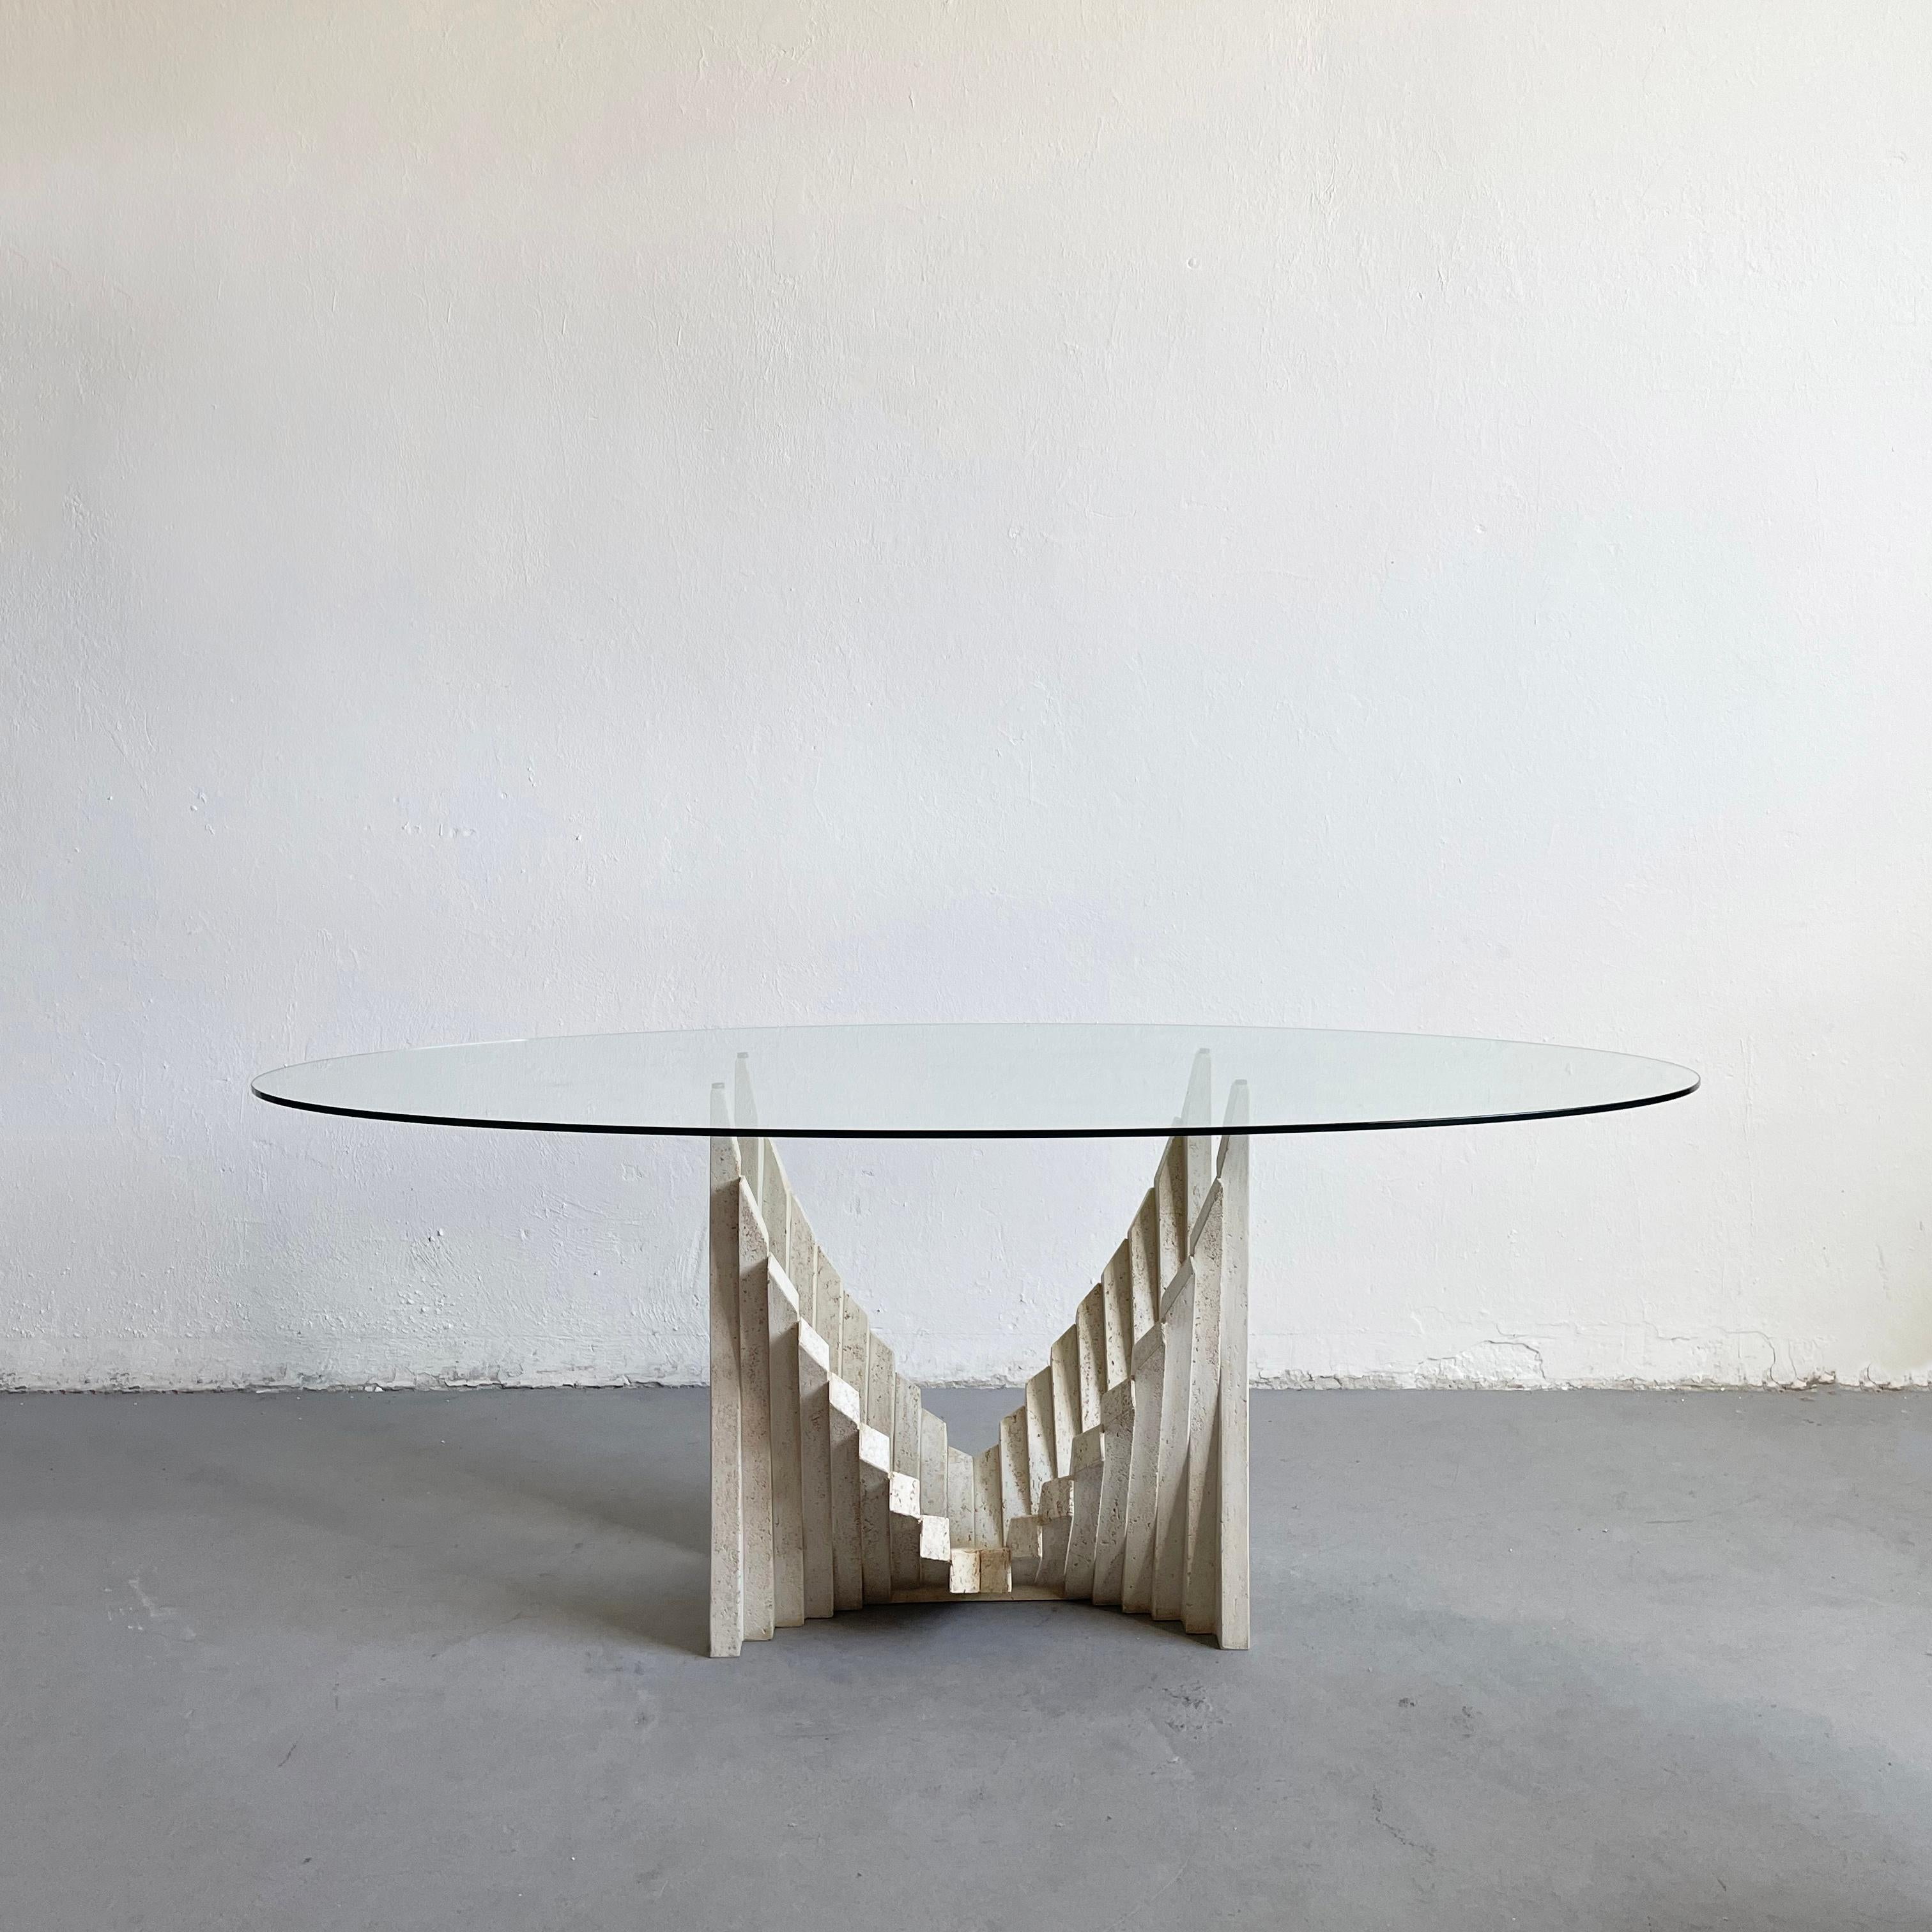 1970s Italian dining table by an unknown maker/designer

The table is very sculptural with a heavy travertine base in a brutalist style

The heavy oval-shaped tabletop is made of clear tempered glass

Suitable for 6 dining chairs

The table is in